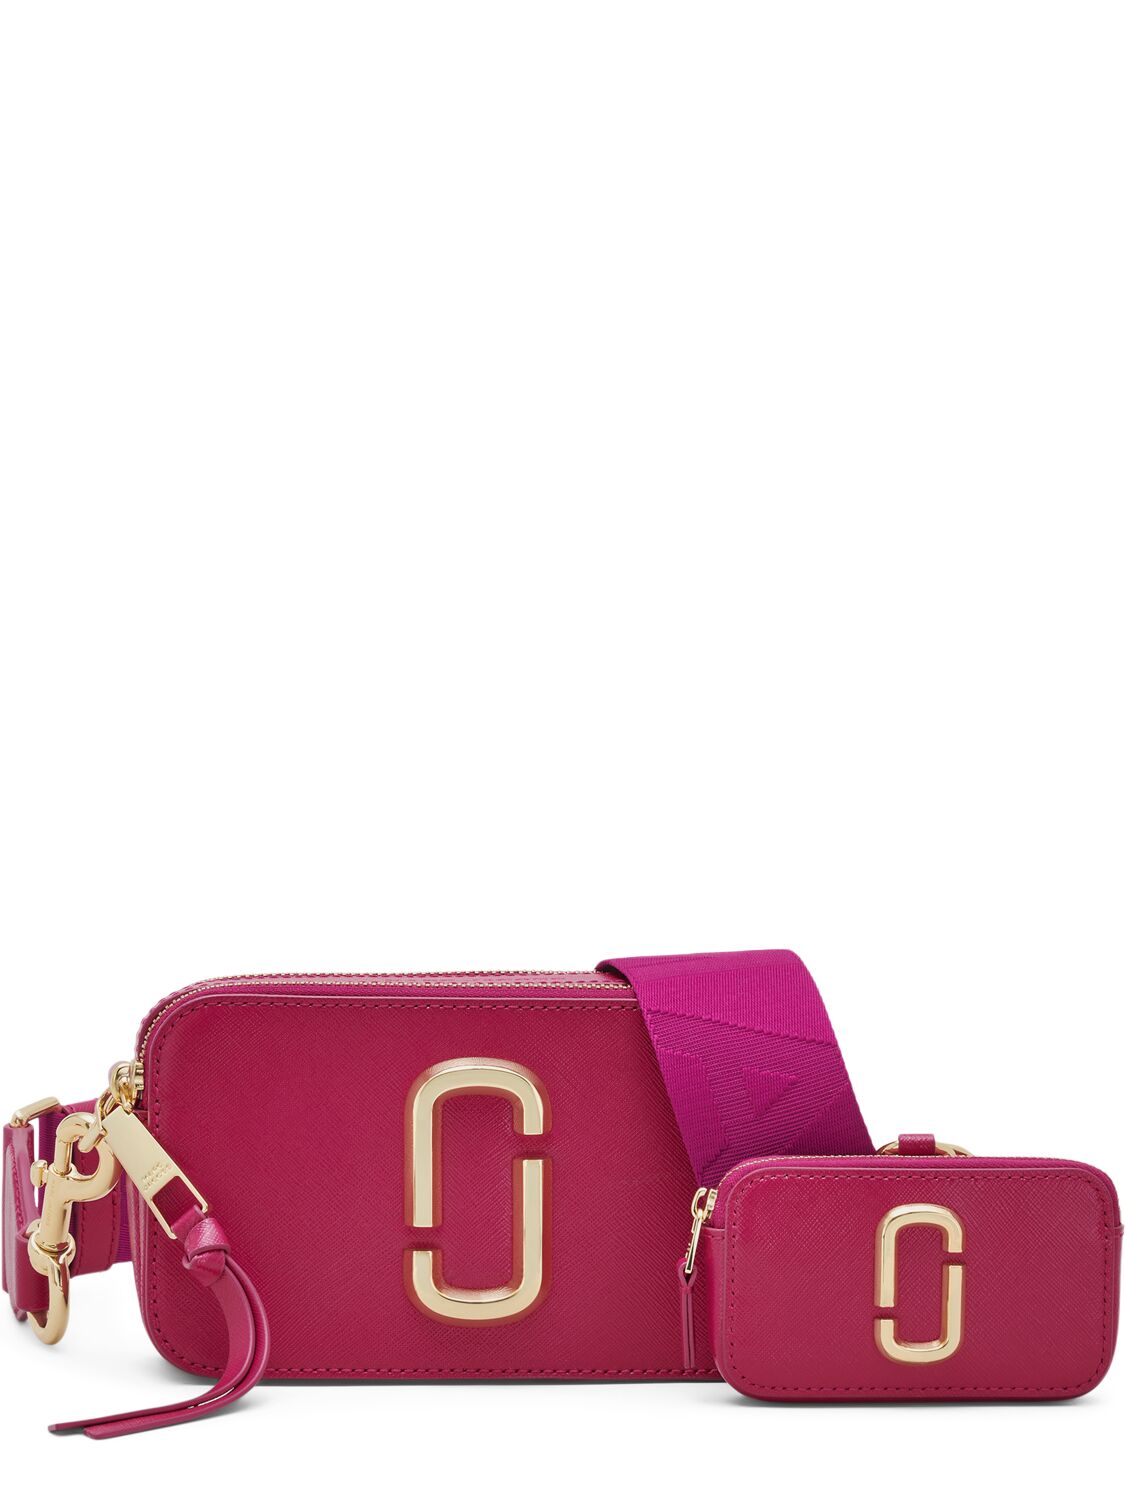 Marc Jacobs The Snapshot Leather Shoulder Bag In Lipstick Pink